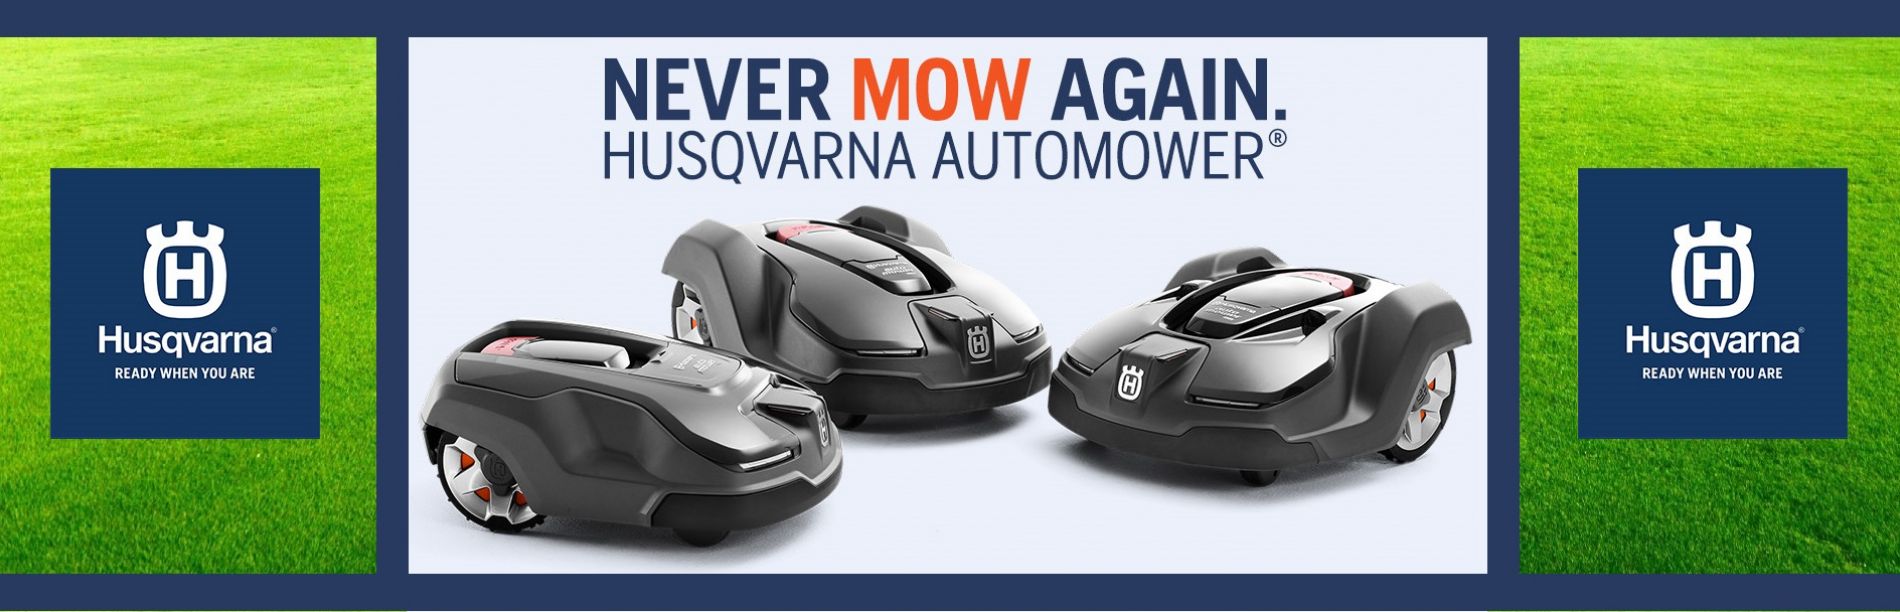 Husqvarna Automower - Find Out More!